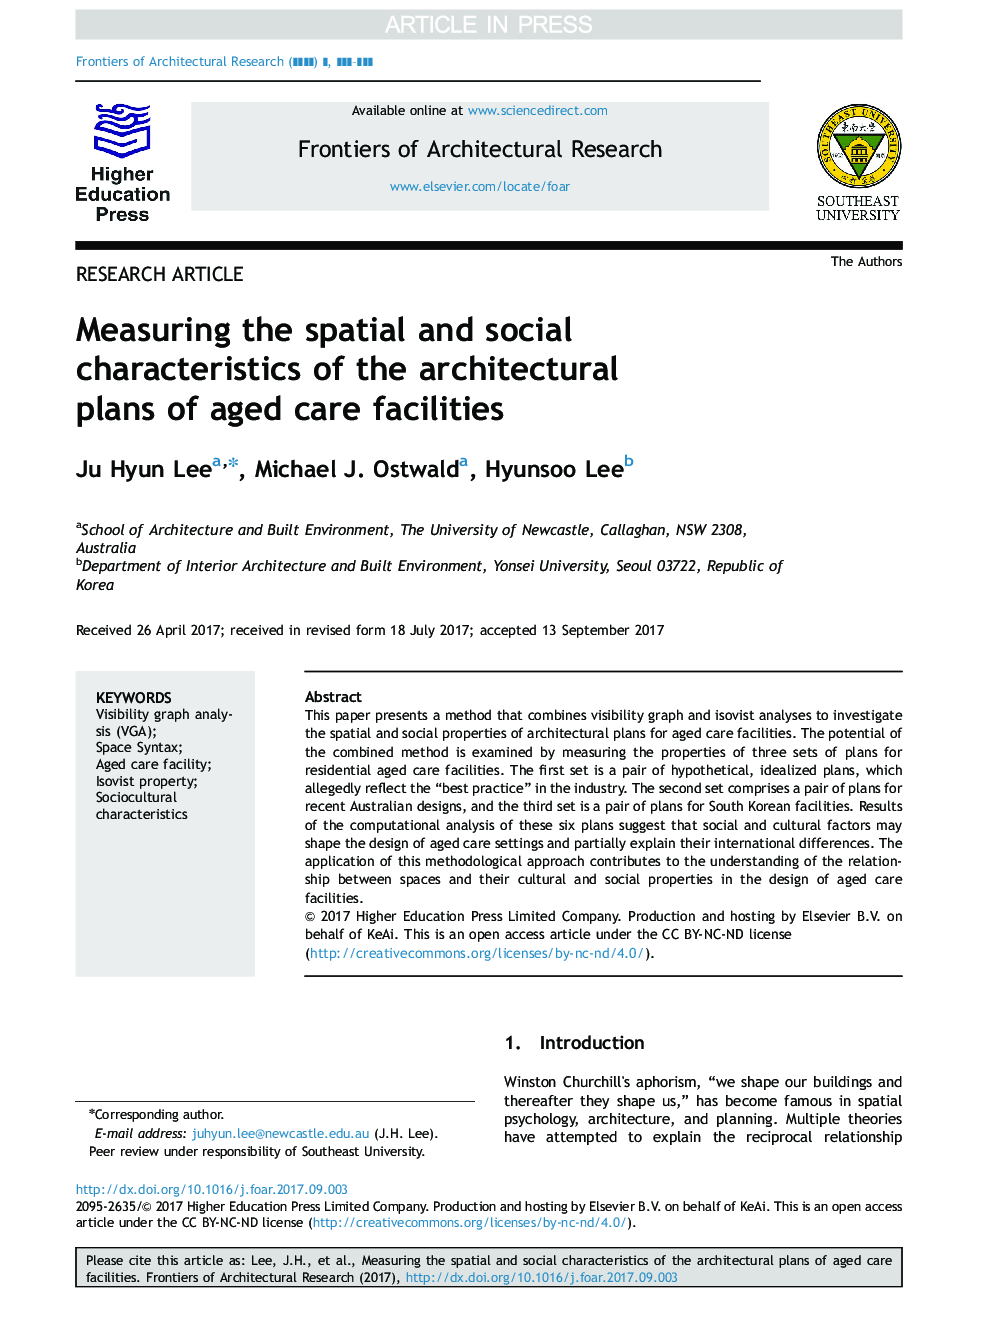 Measuring the spatial and social characteristics of the architectural plans of aged care facilities